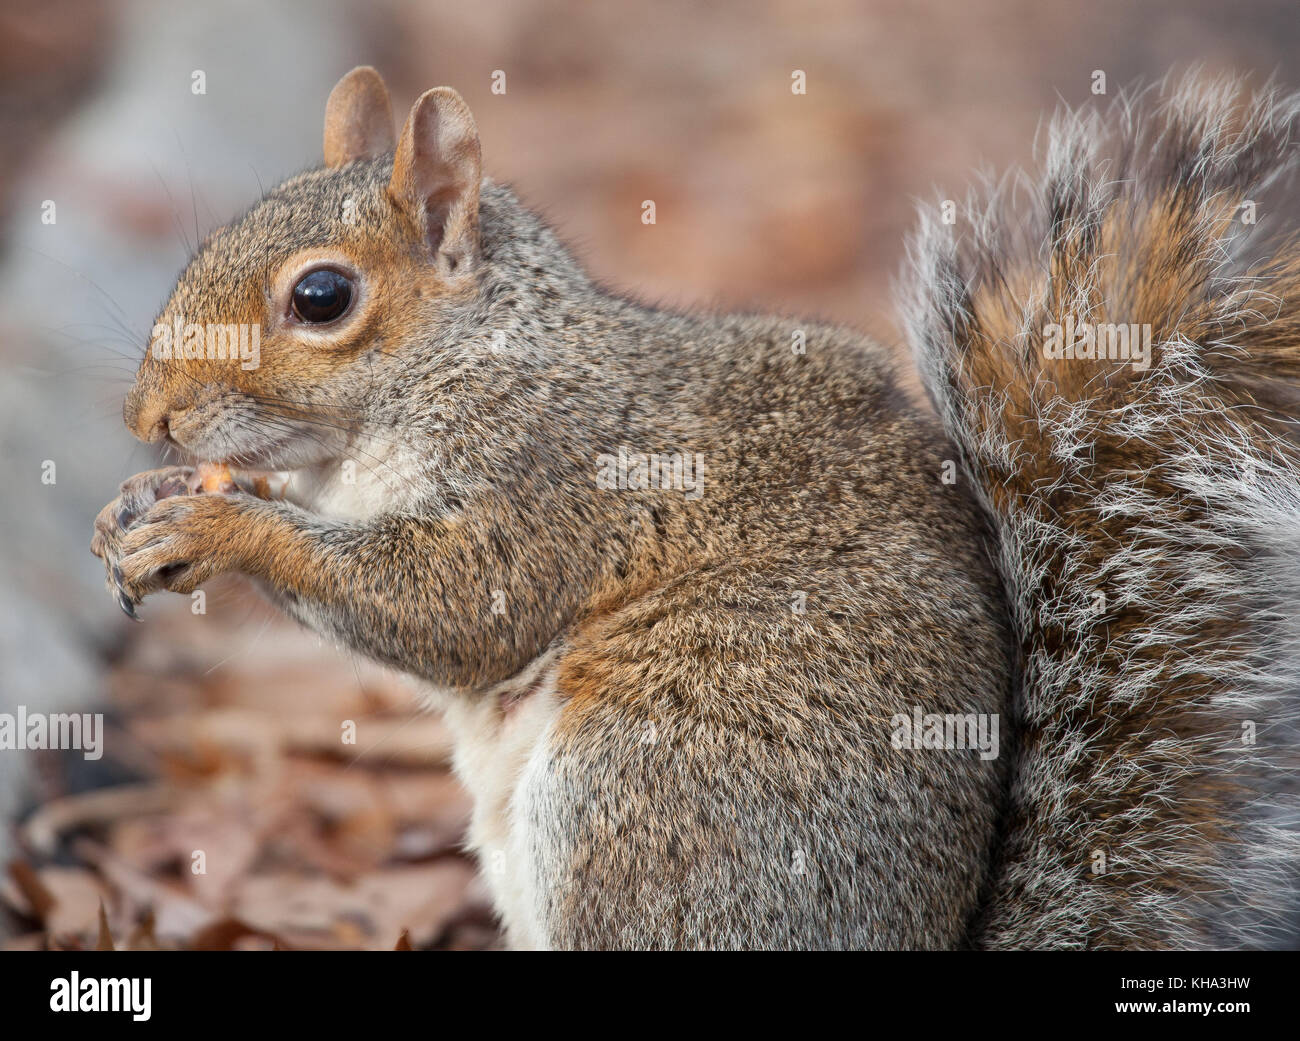 Squirrel in Central Park, New York City Stock Photo